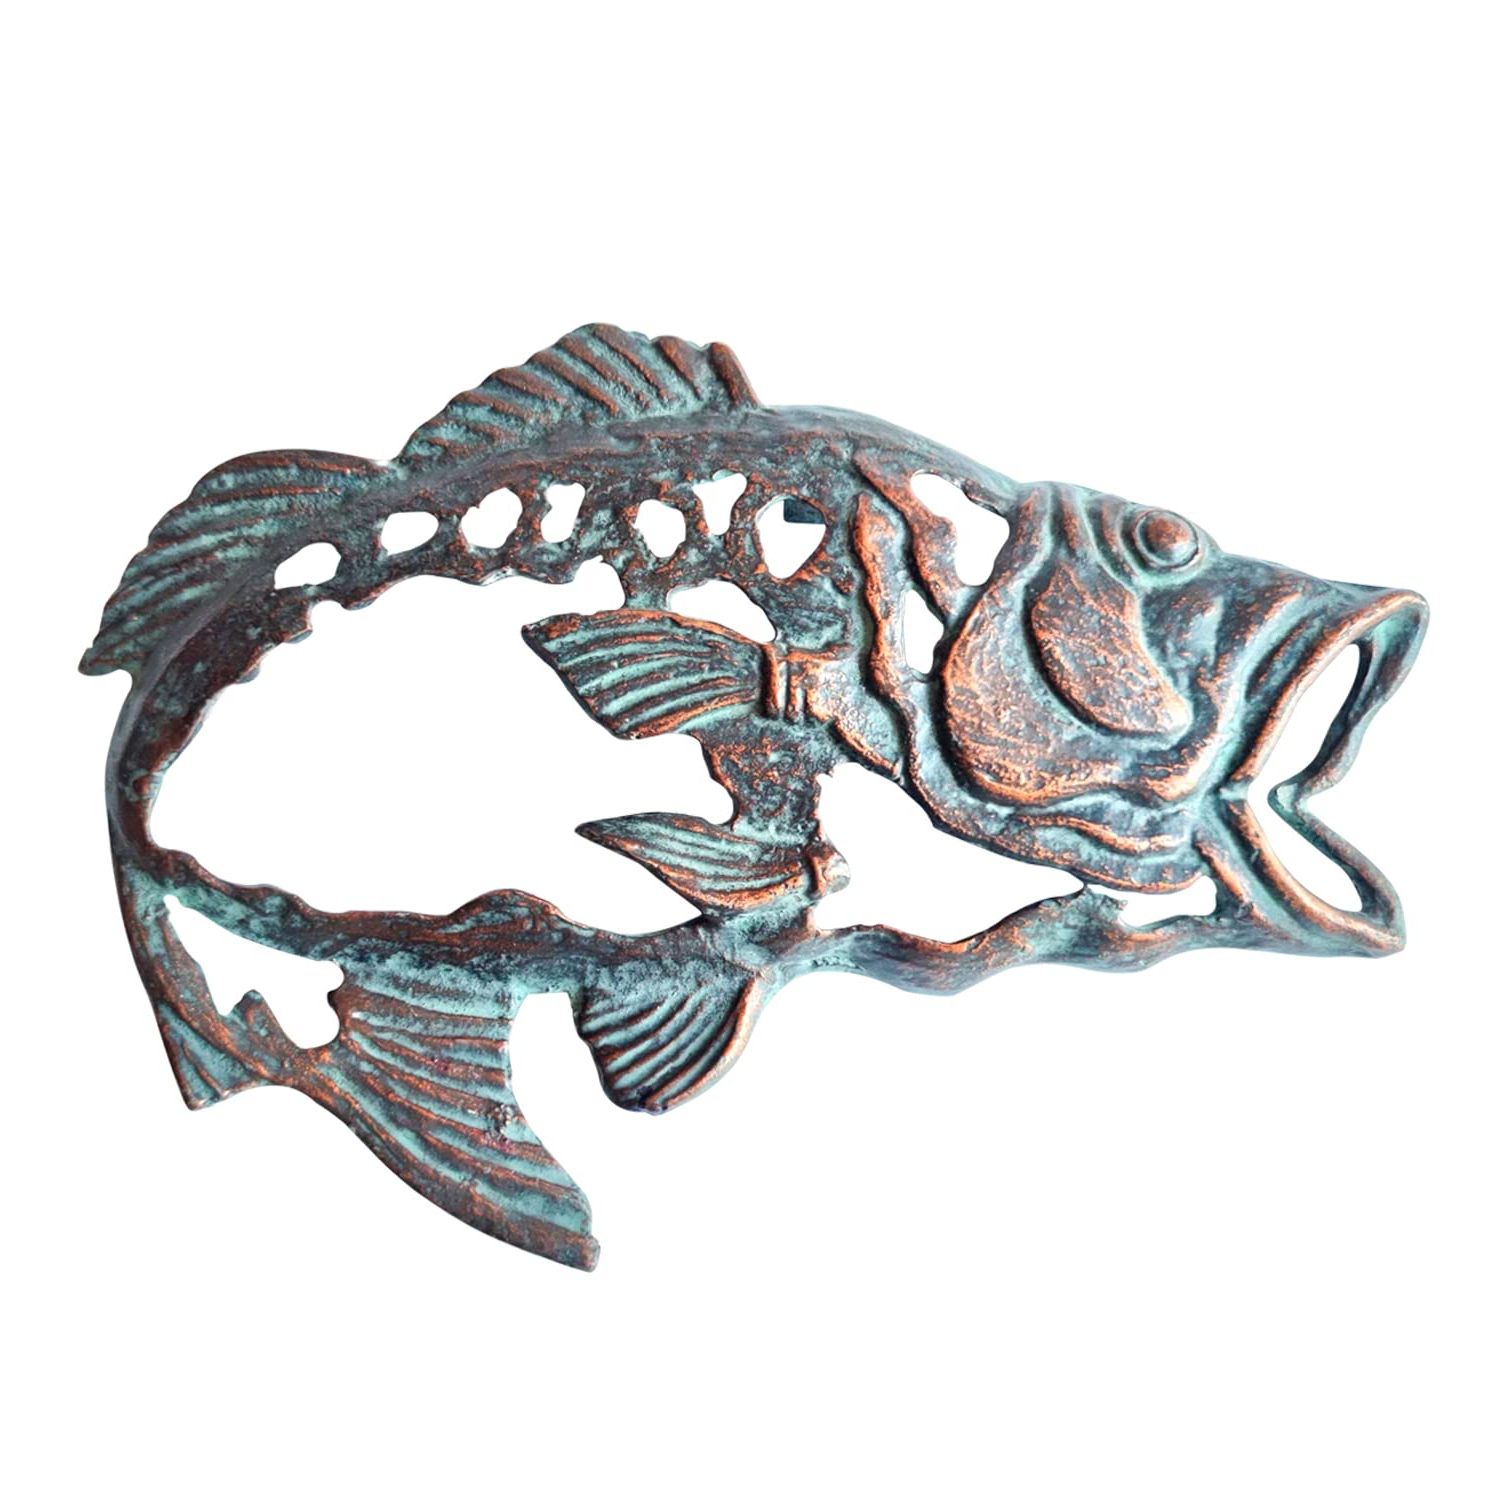 Heavy Duty Wall Art Inside Current Amazon: Cyqgdkf Wall Art Fish Decor – Cast Iron Wall Decor – Unique  Large Mouth Bass Design Metal Wall Art – Heavy Duty Durable Construction –  Easy Mounting – Ideal For Locals, (Photo 3 of 15)